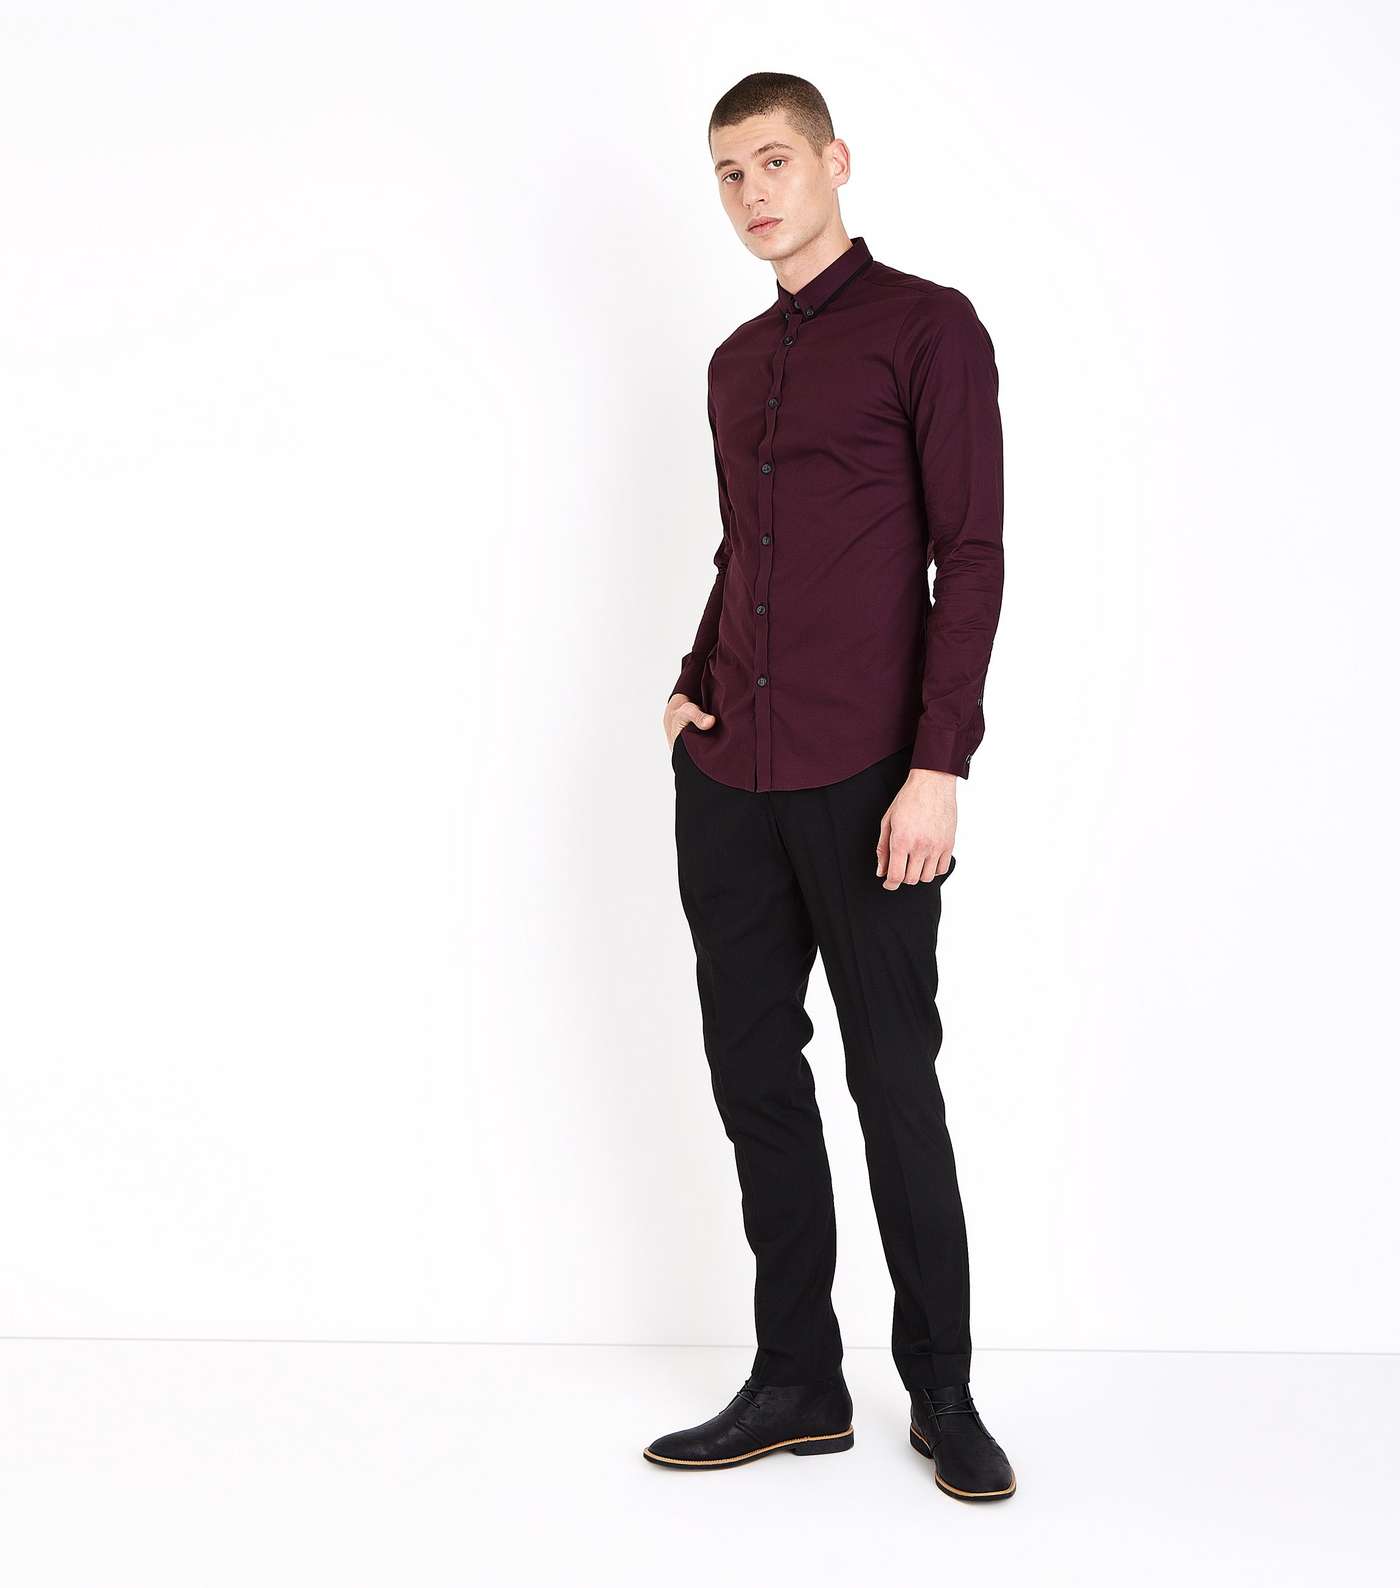 Burgundy Double Collar Trim Muscle Fit Shirt Image 2